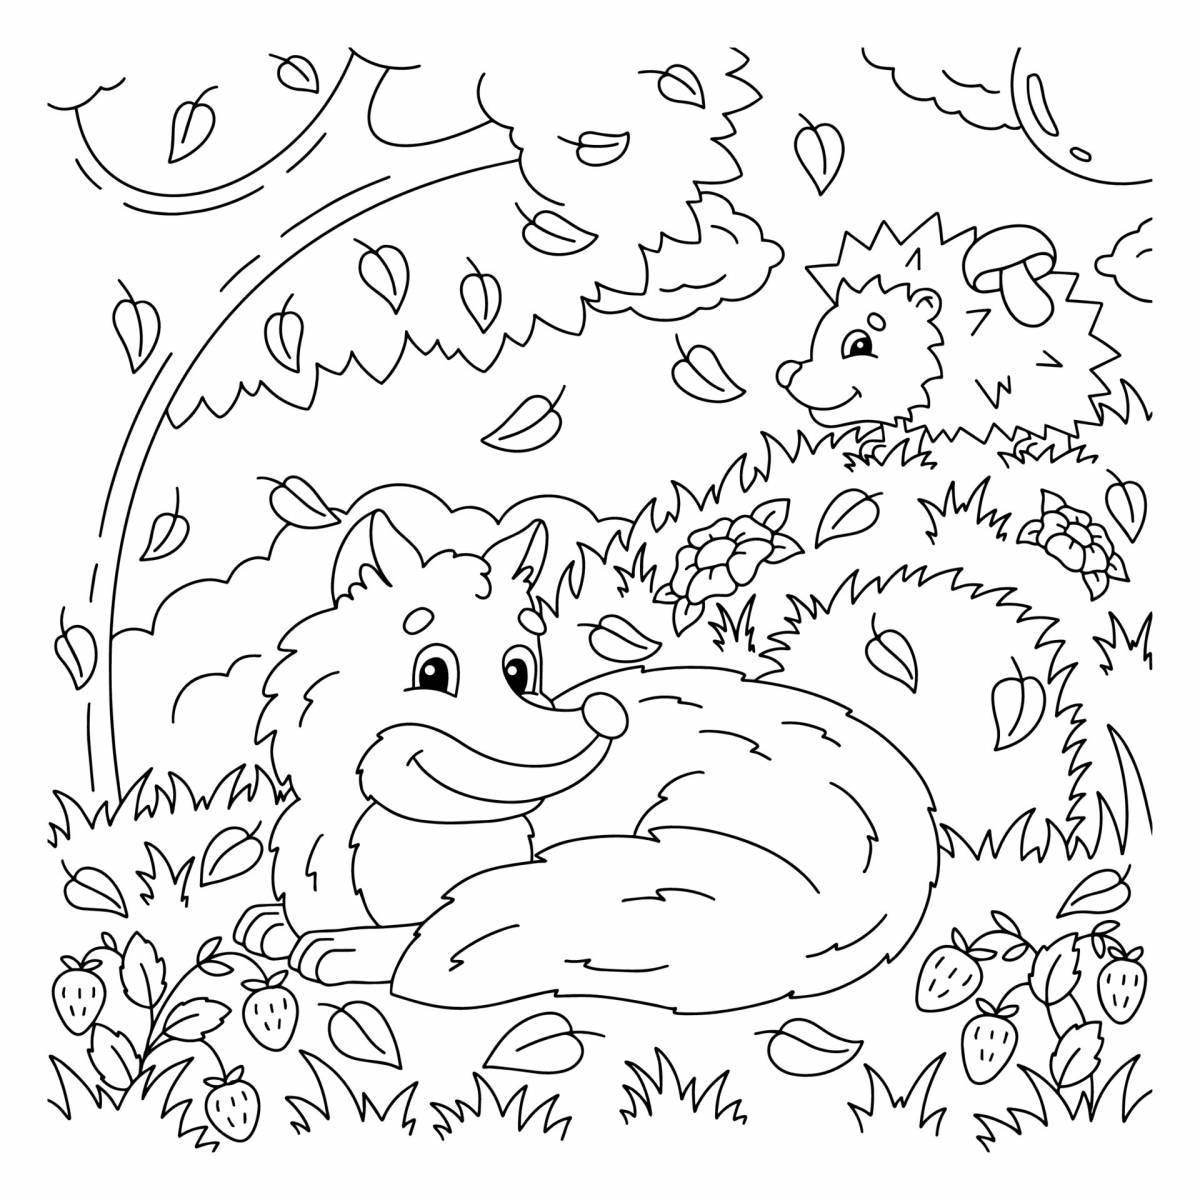 A shining hedgehog in the forest